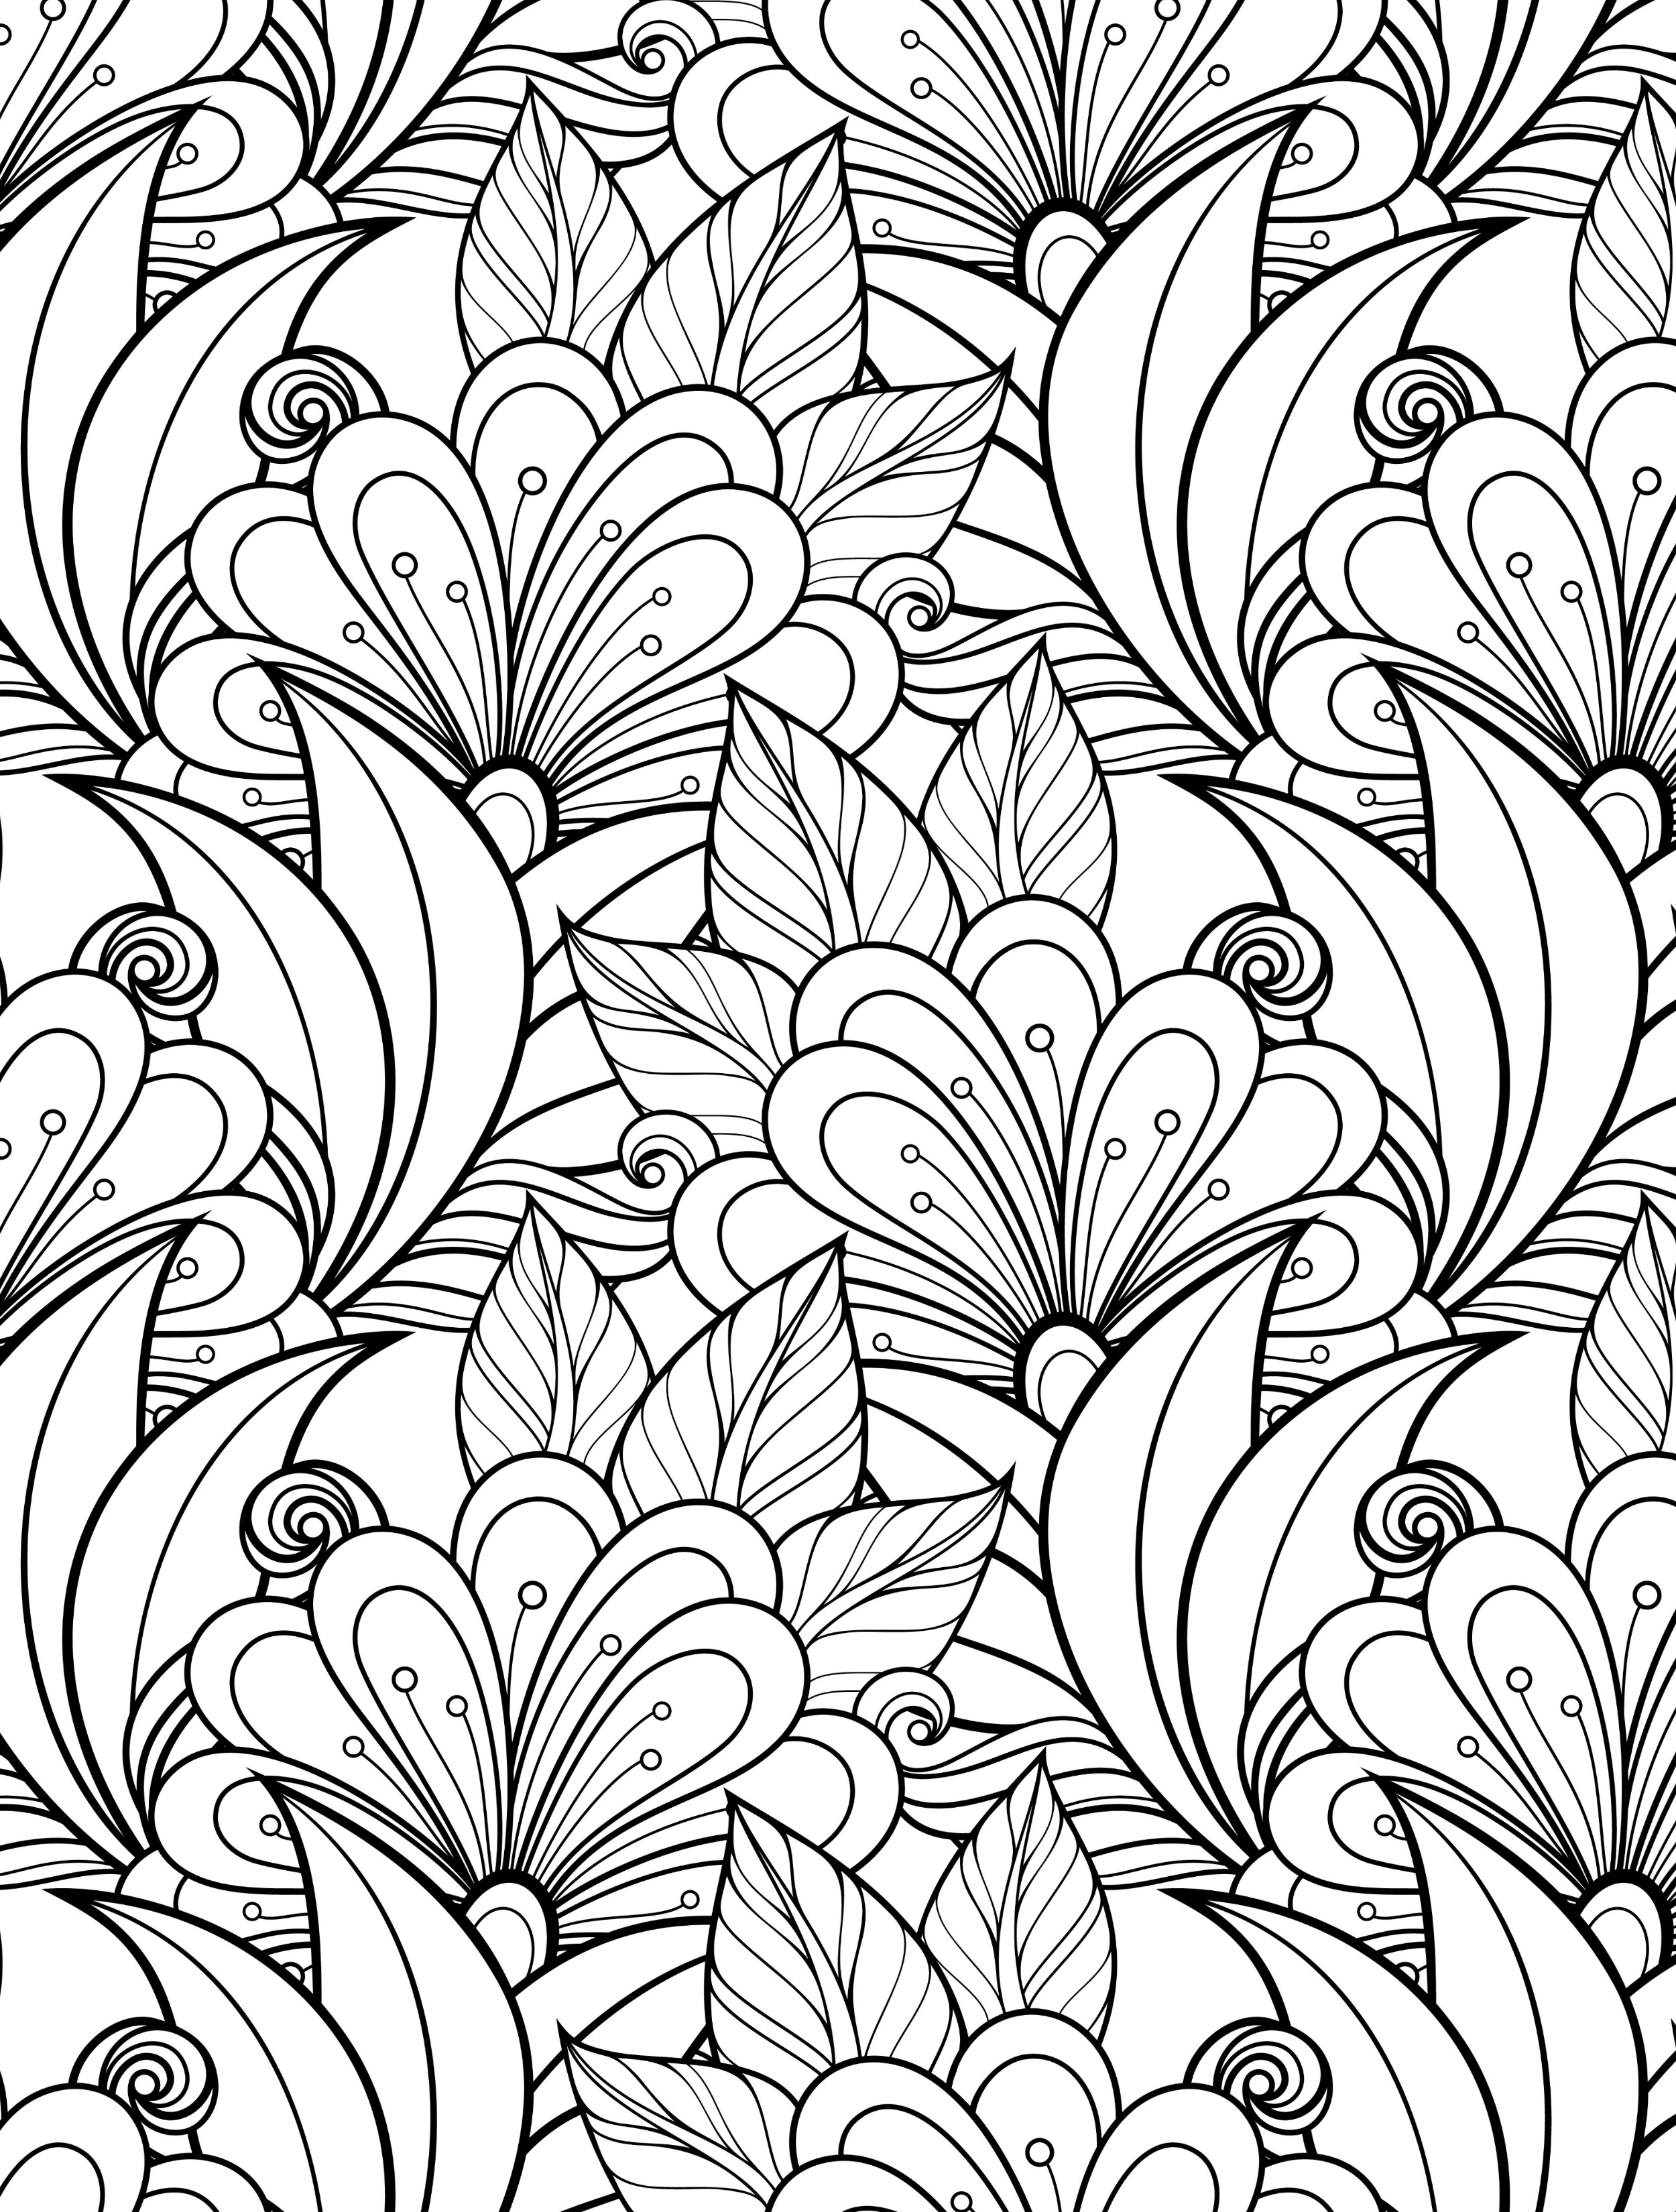 Coloring Books For Adults Free Printable